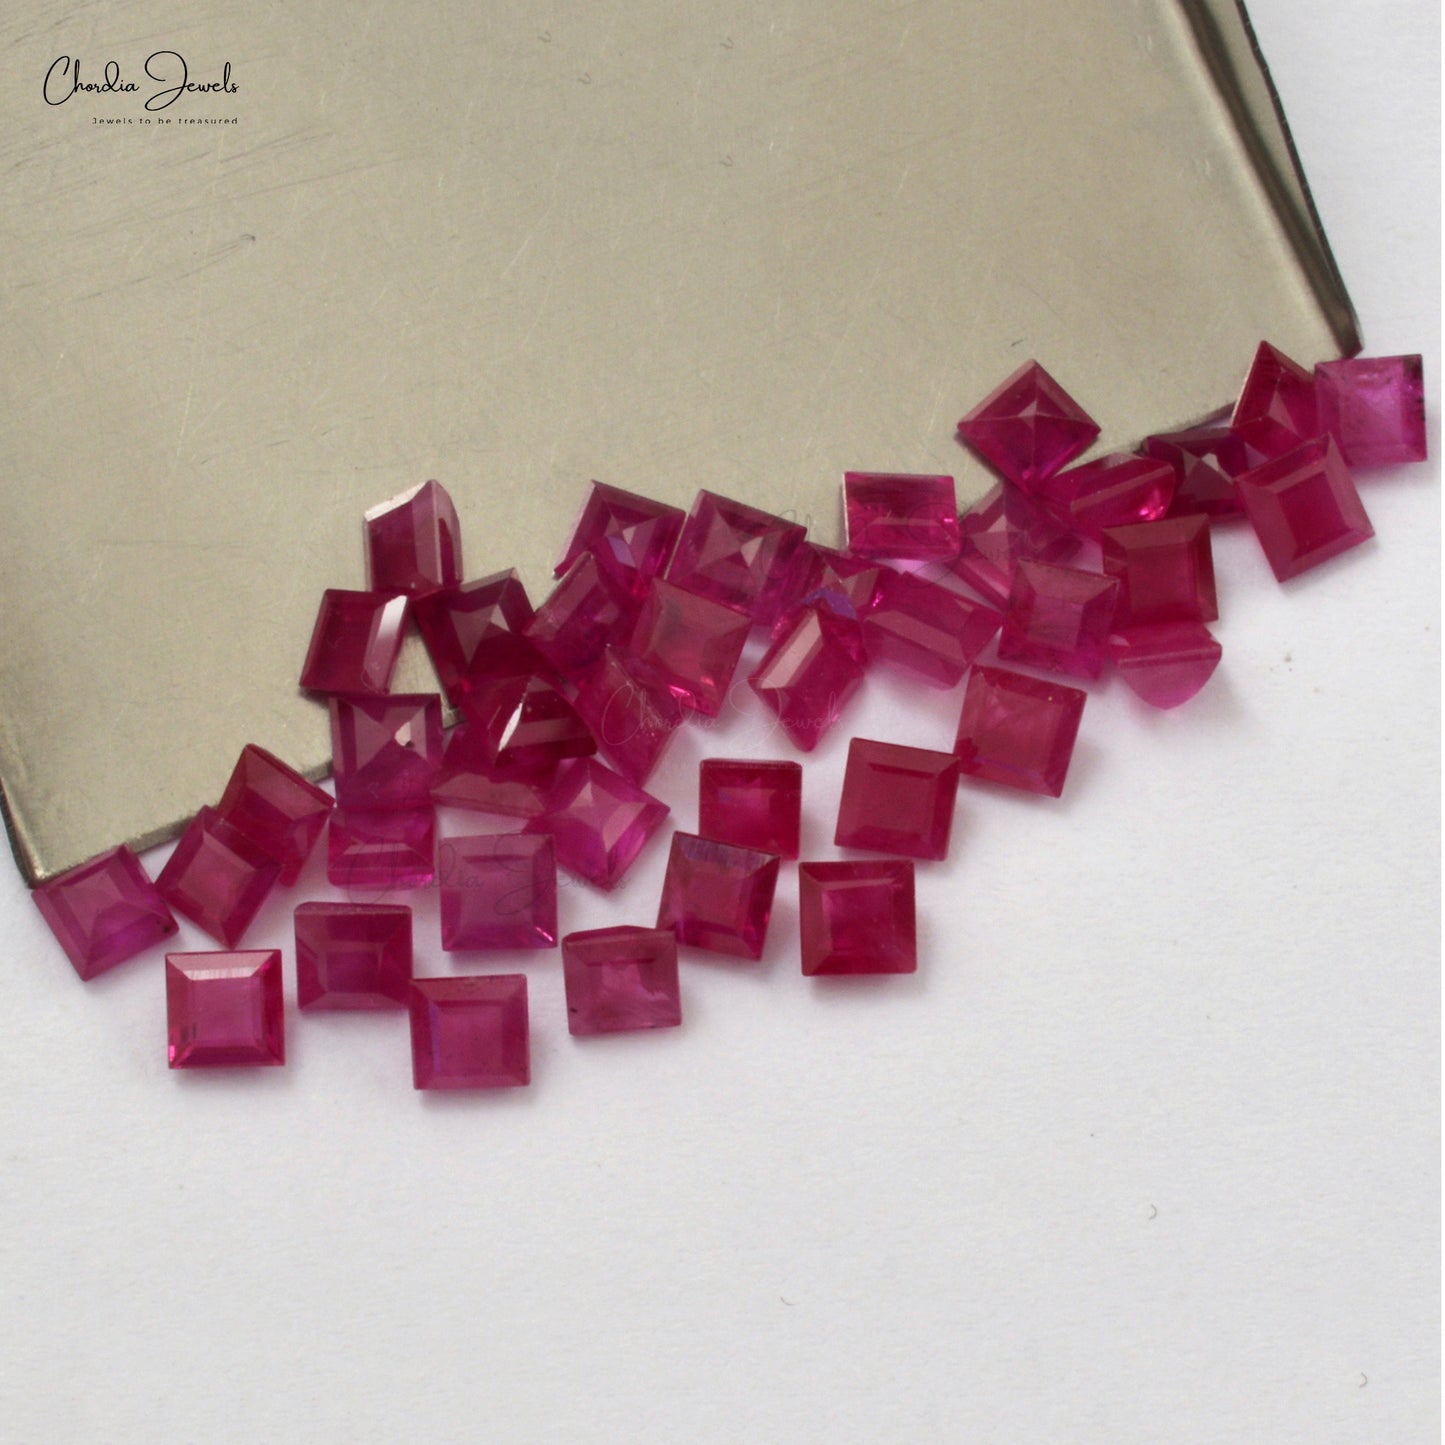 Wholesale Lot Natural Ruby Gemstone 3mm-3.5mm for Jewelry Making, 1 Piece